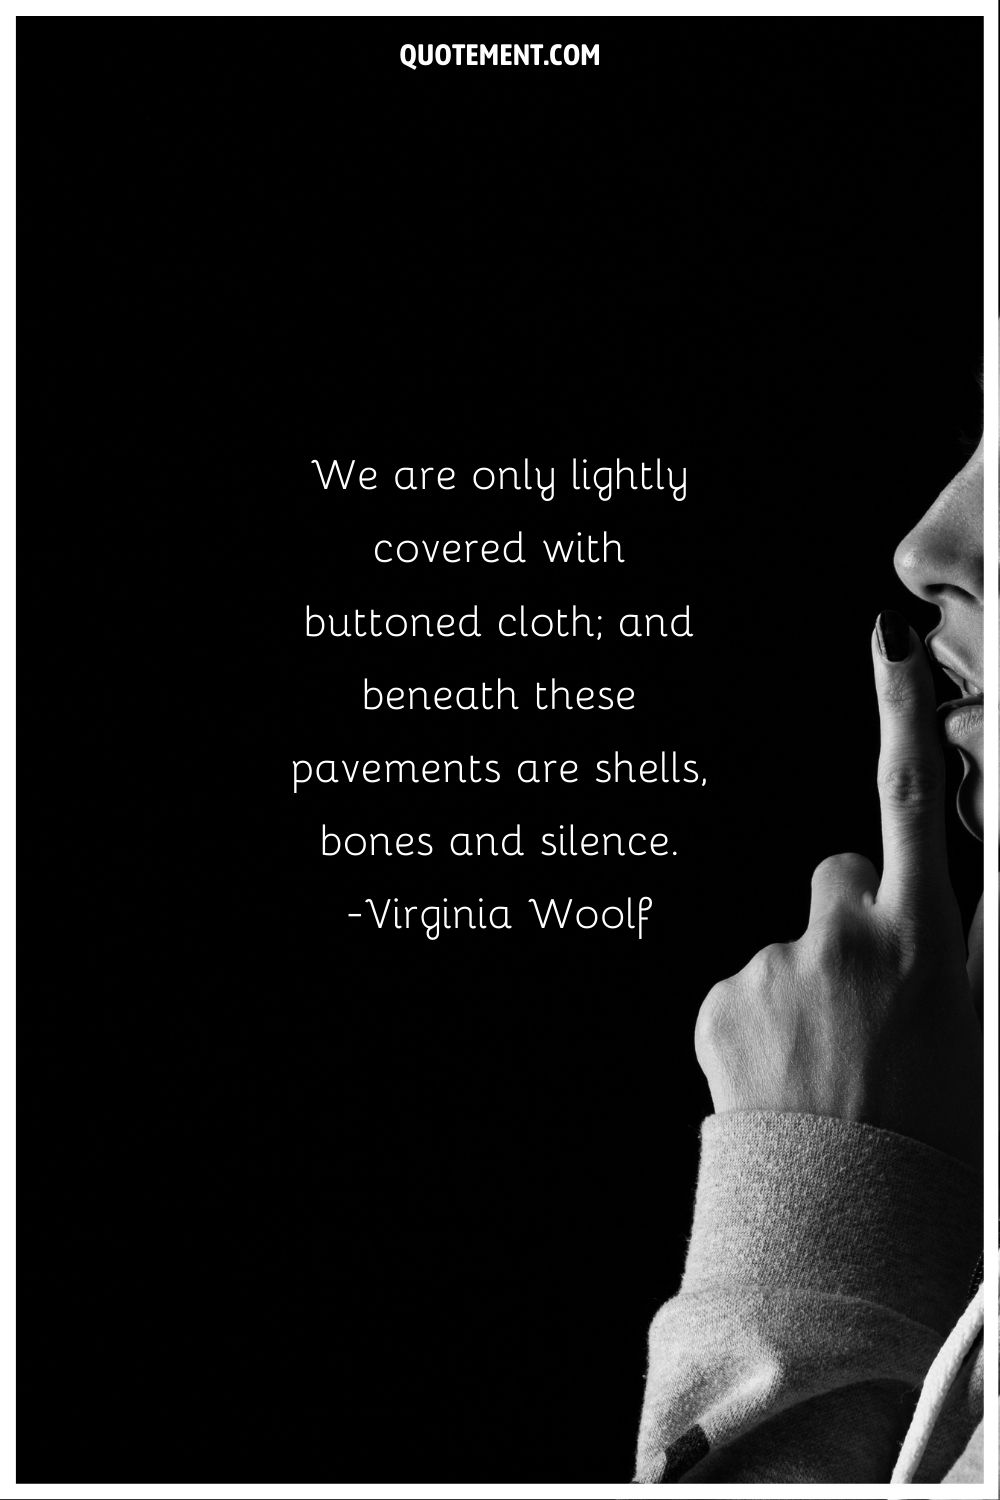 “We are only lightly covered with buttoned cloth; and beneath these pavements are shells, bones and silence.” ― Virginia Woolf, The Waves